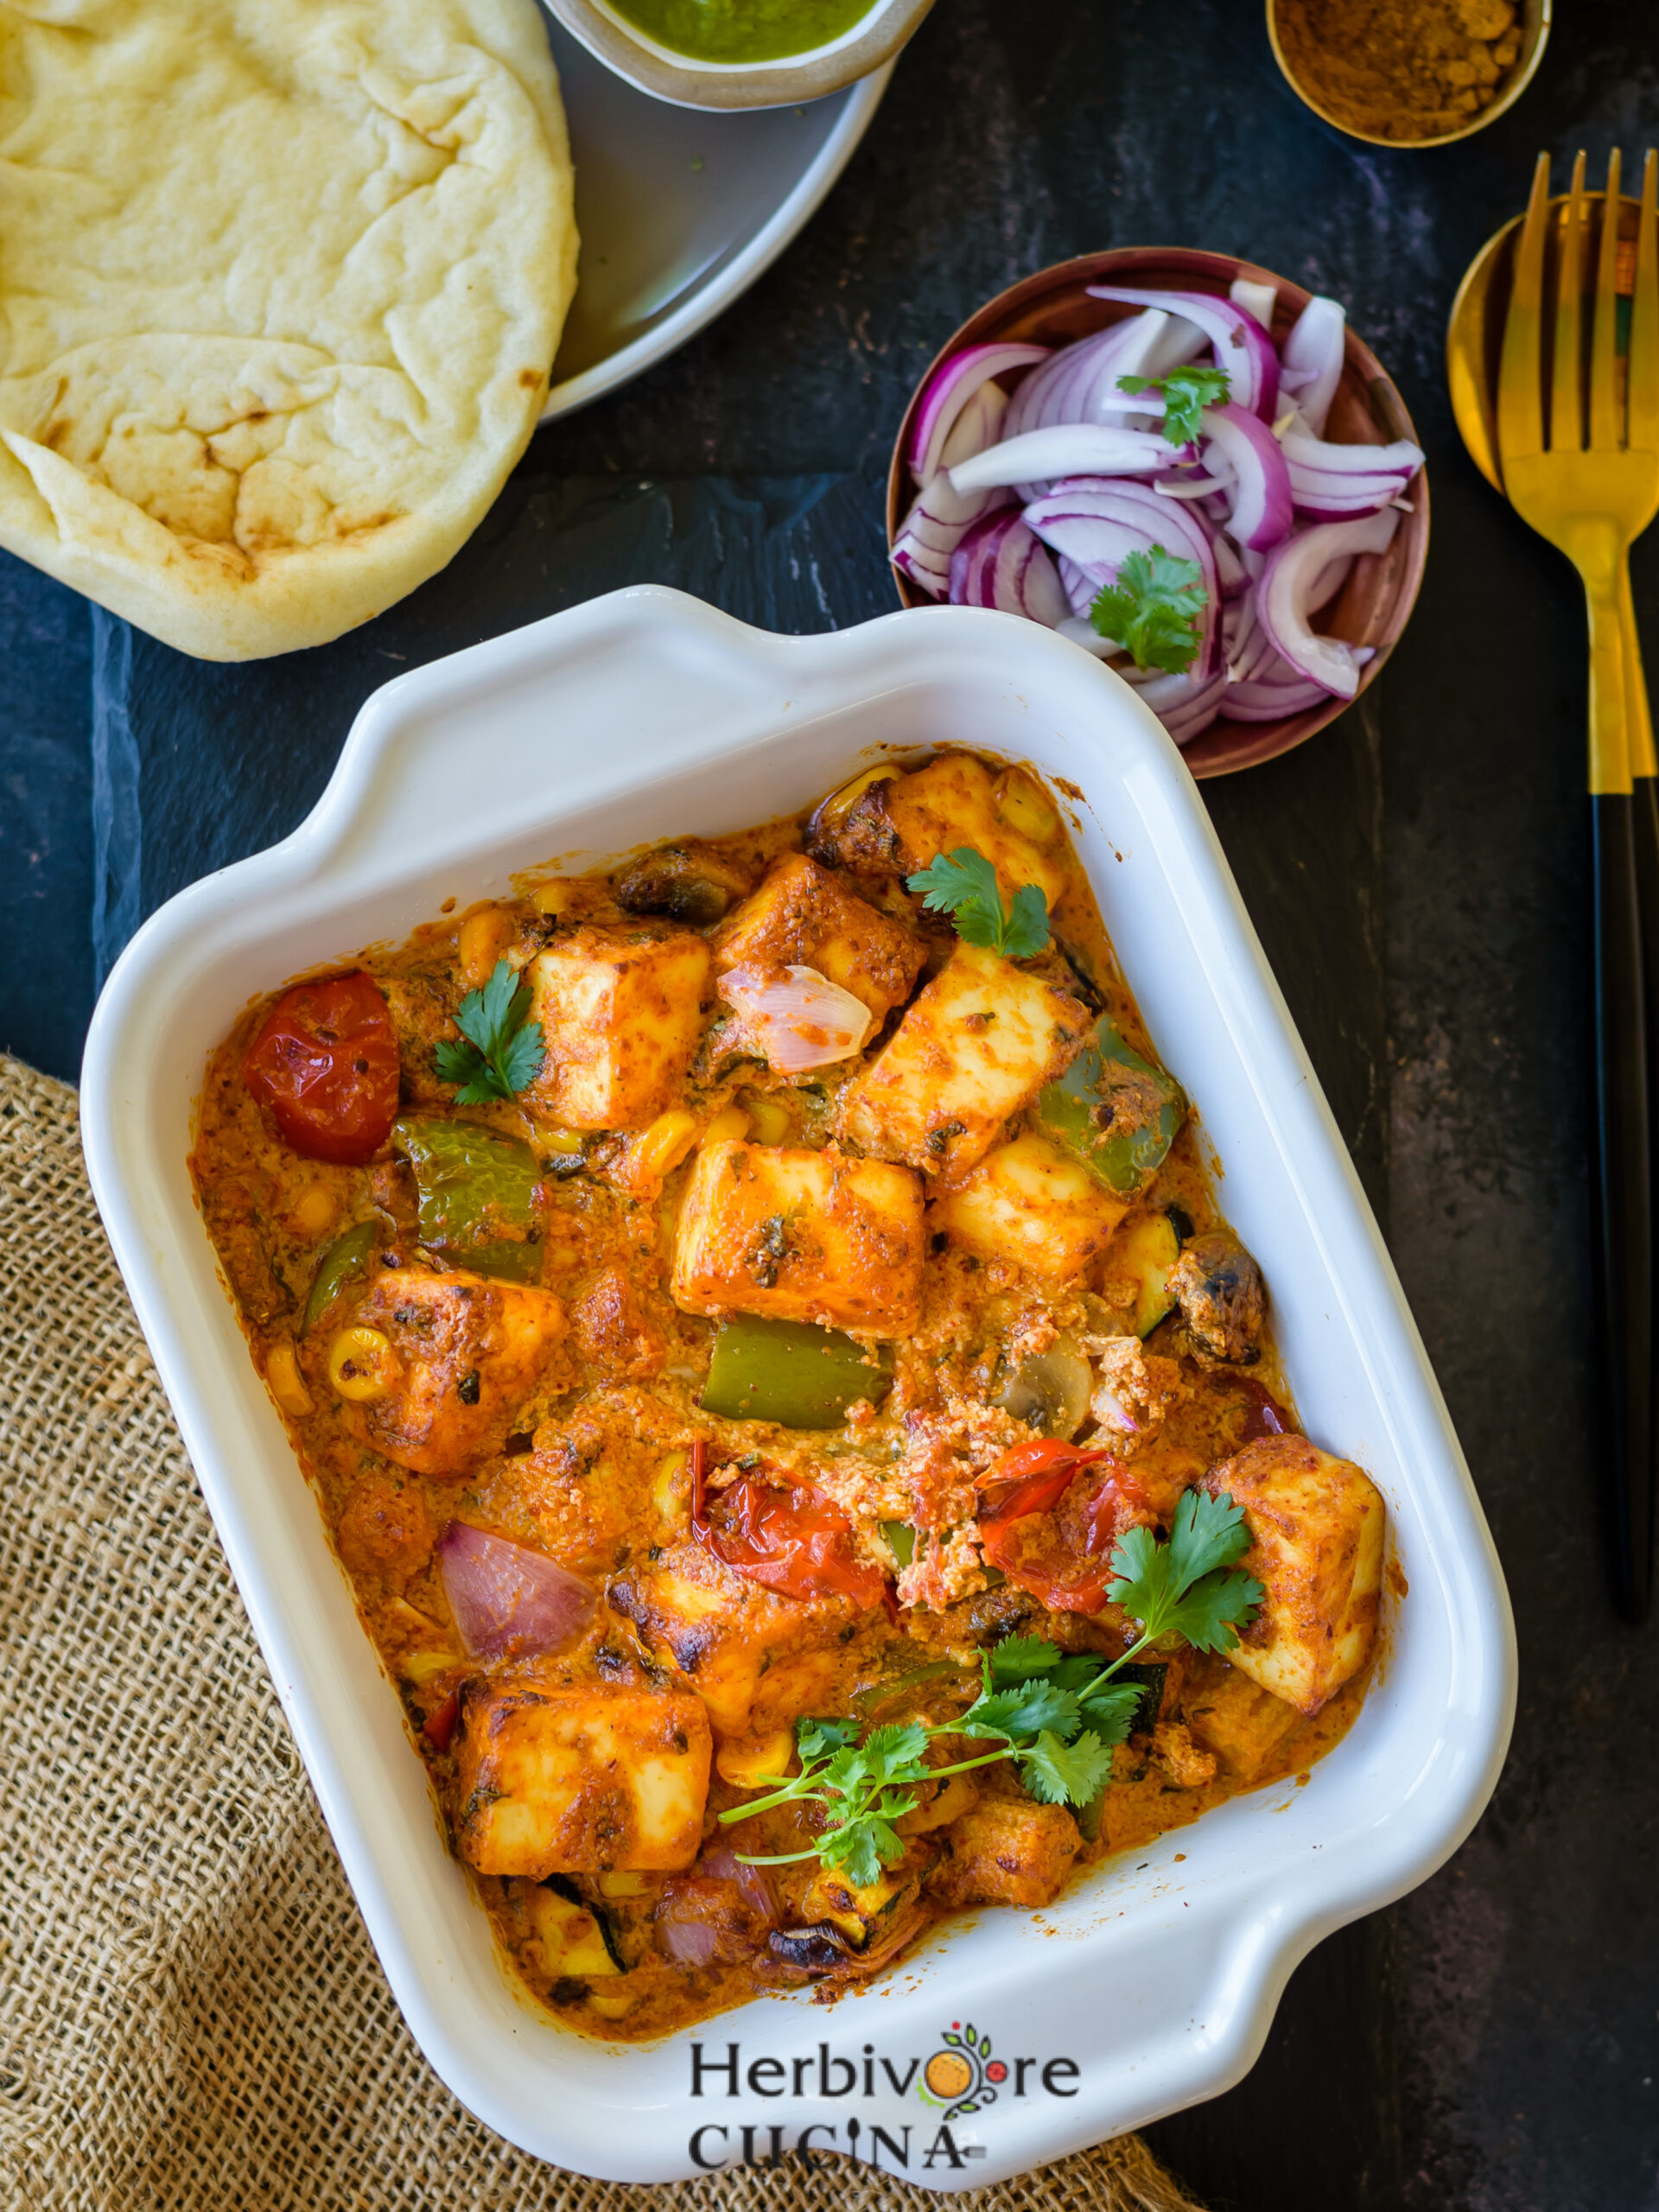 malai paneer, a mix of marinated paneer, peppers and onions baked in the sire fryer served in a white rectangle tray on a black surface. 